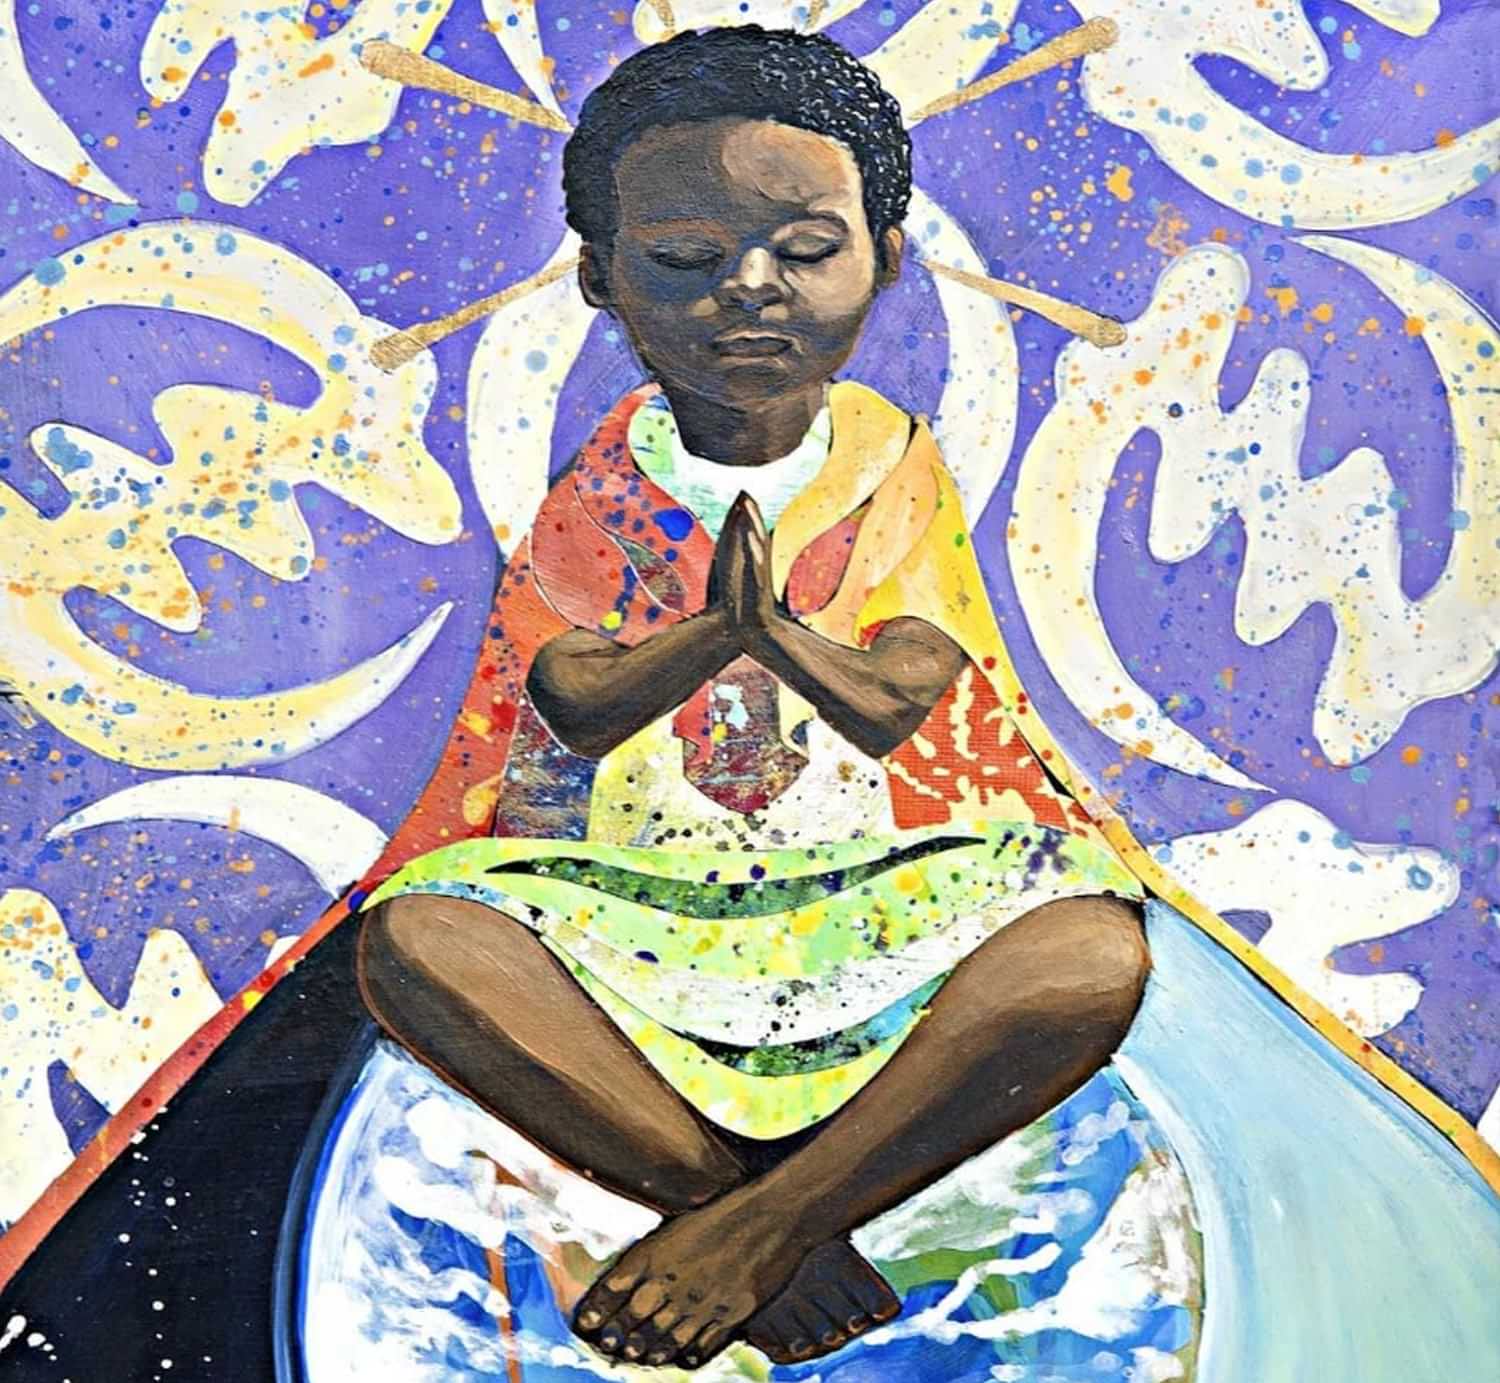 mixed media artwork depicting a young black boy wearing a long cloak while sitting atop the earth with his eyes closed and hands in prayer